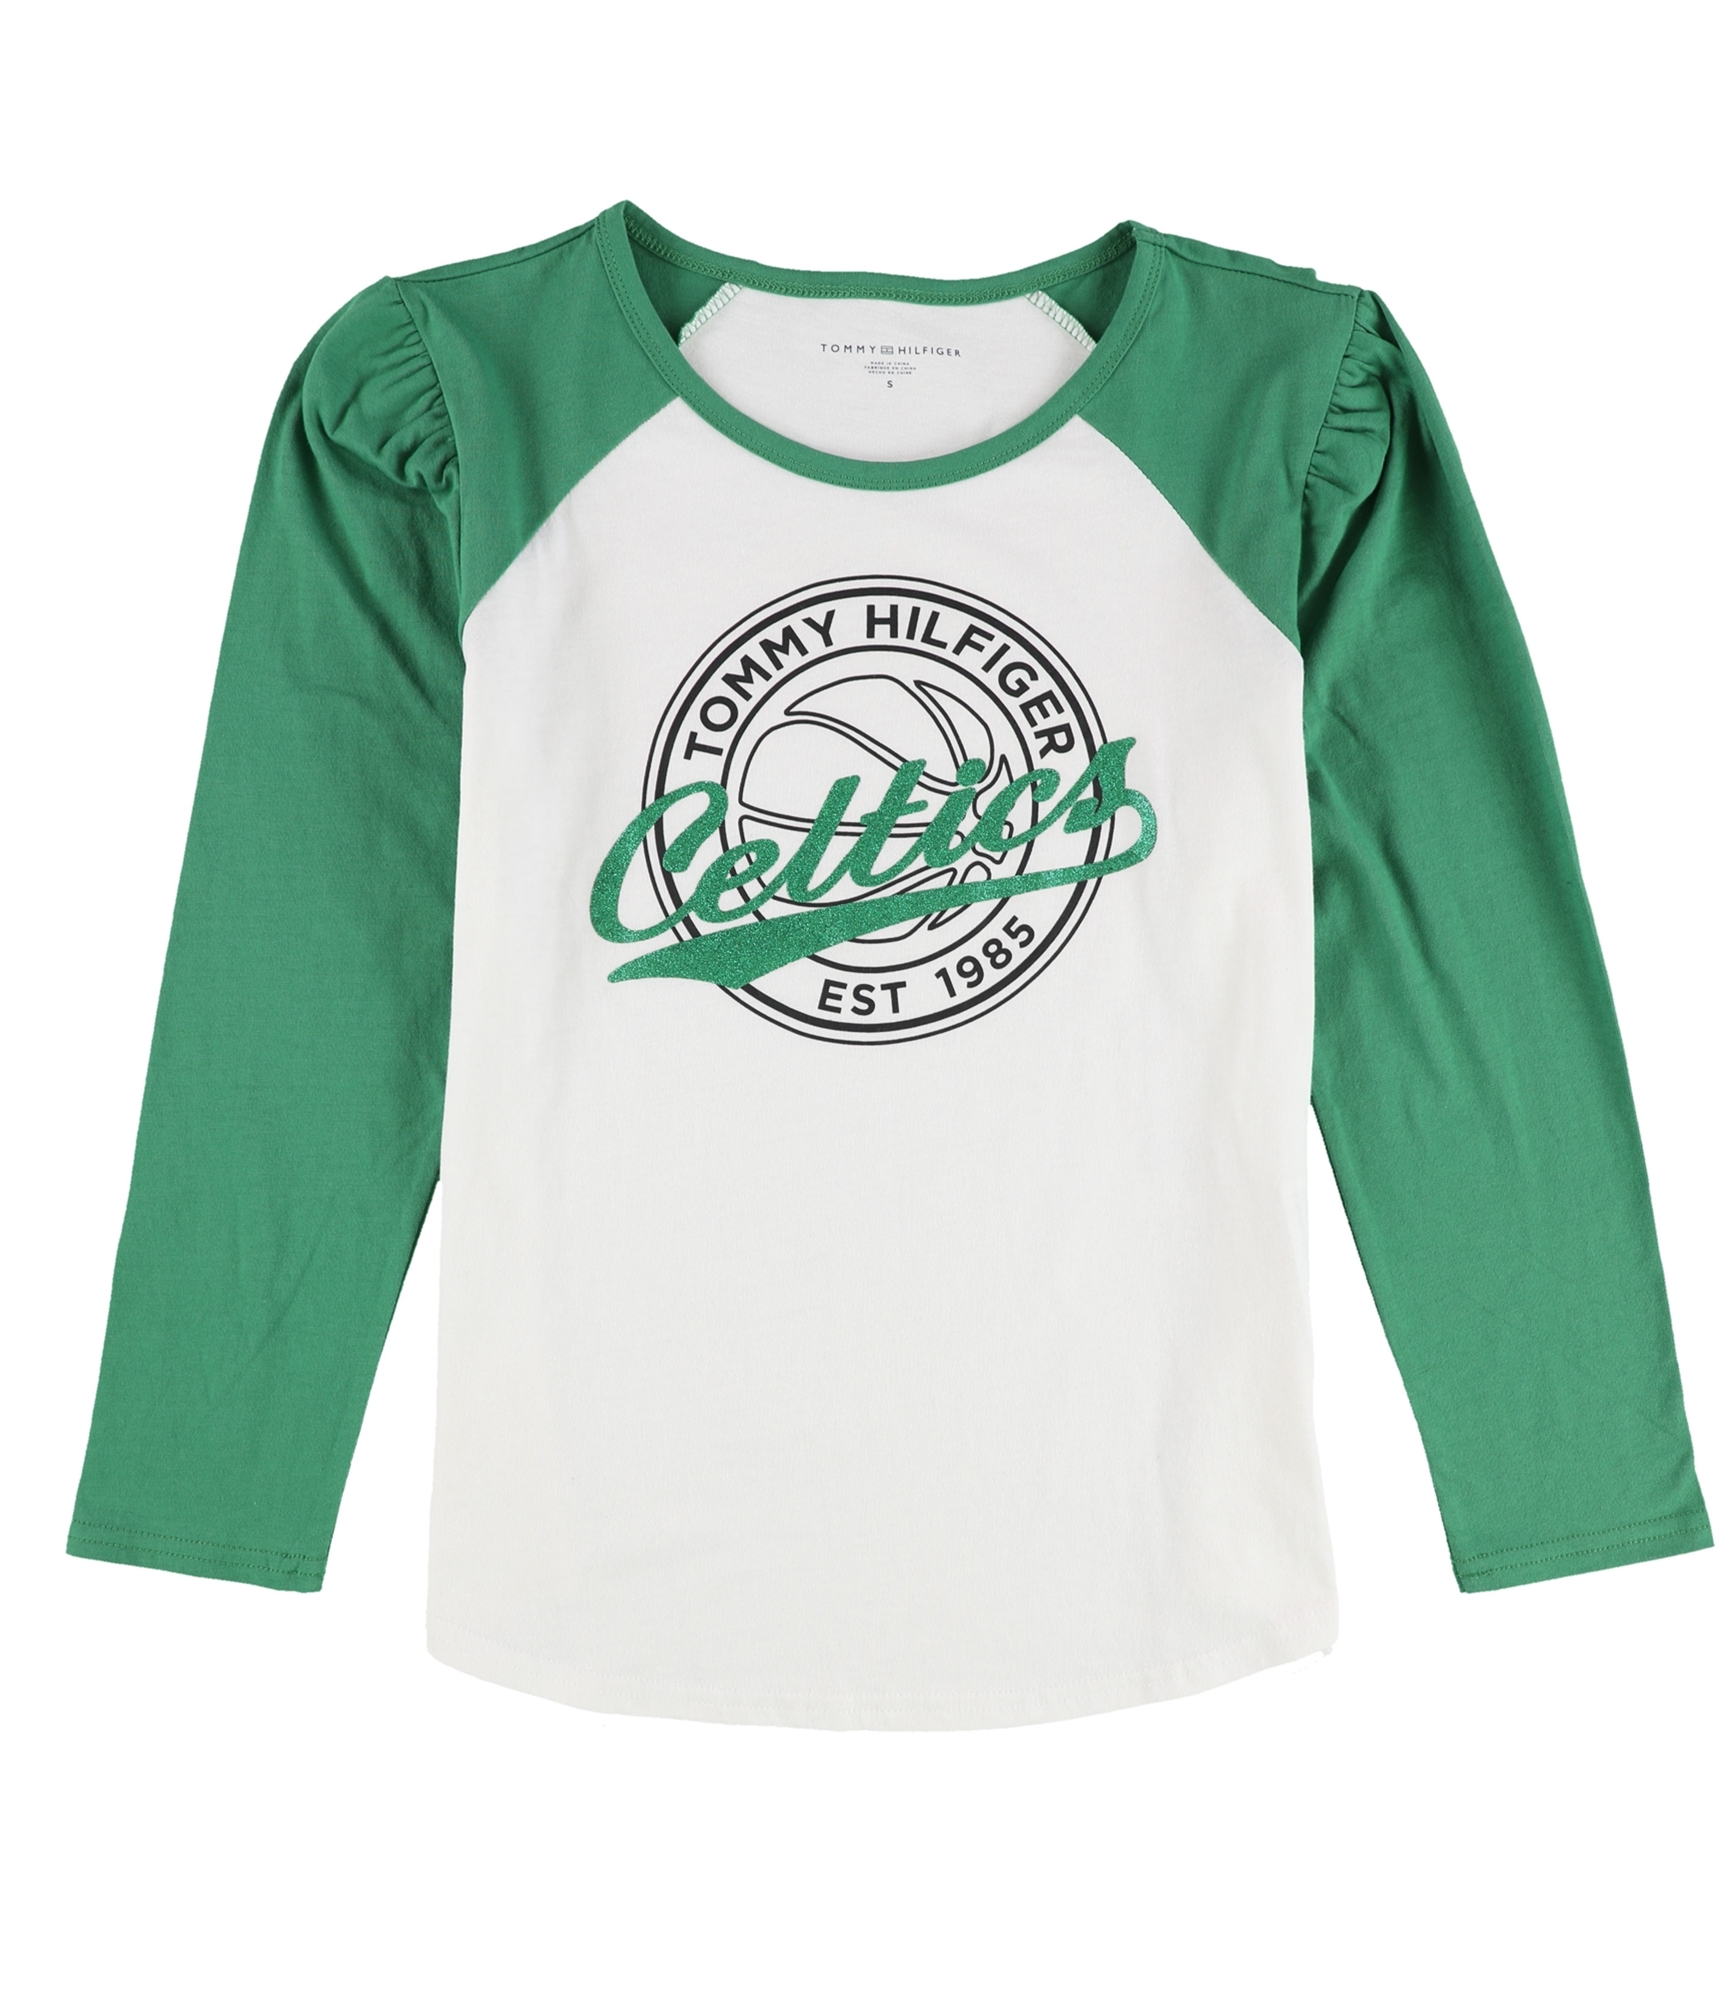 Lappe Brug for nabo Buy a Womens Tommy Hilfiger Boston Celtics Graphic T-Shirt Online |  TagsWeekly.com, TW4